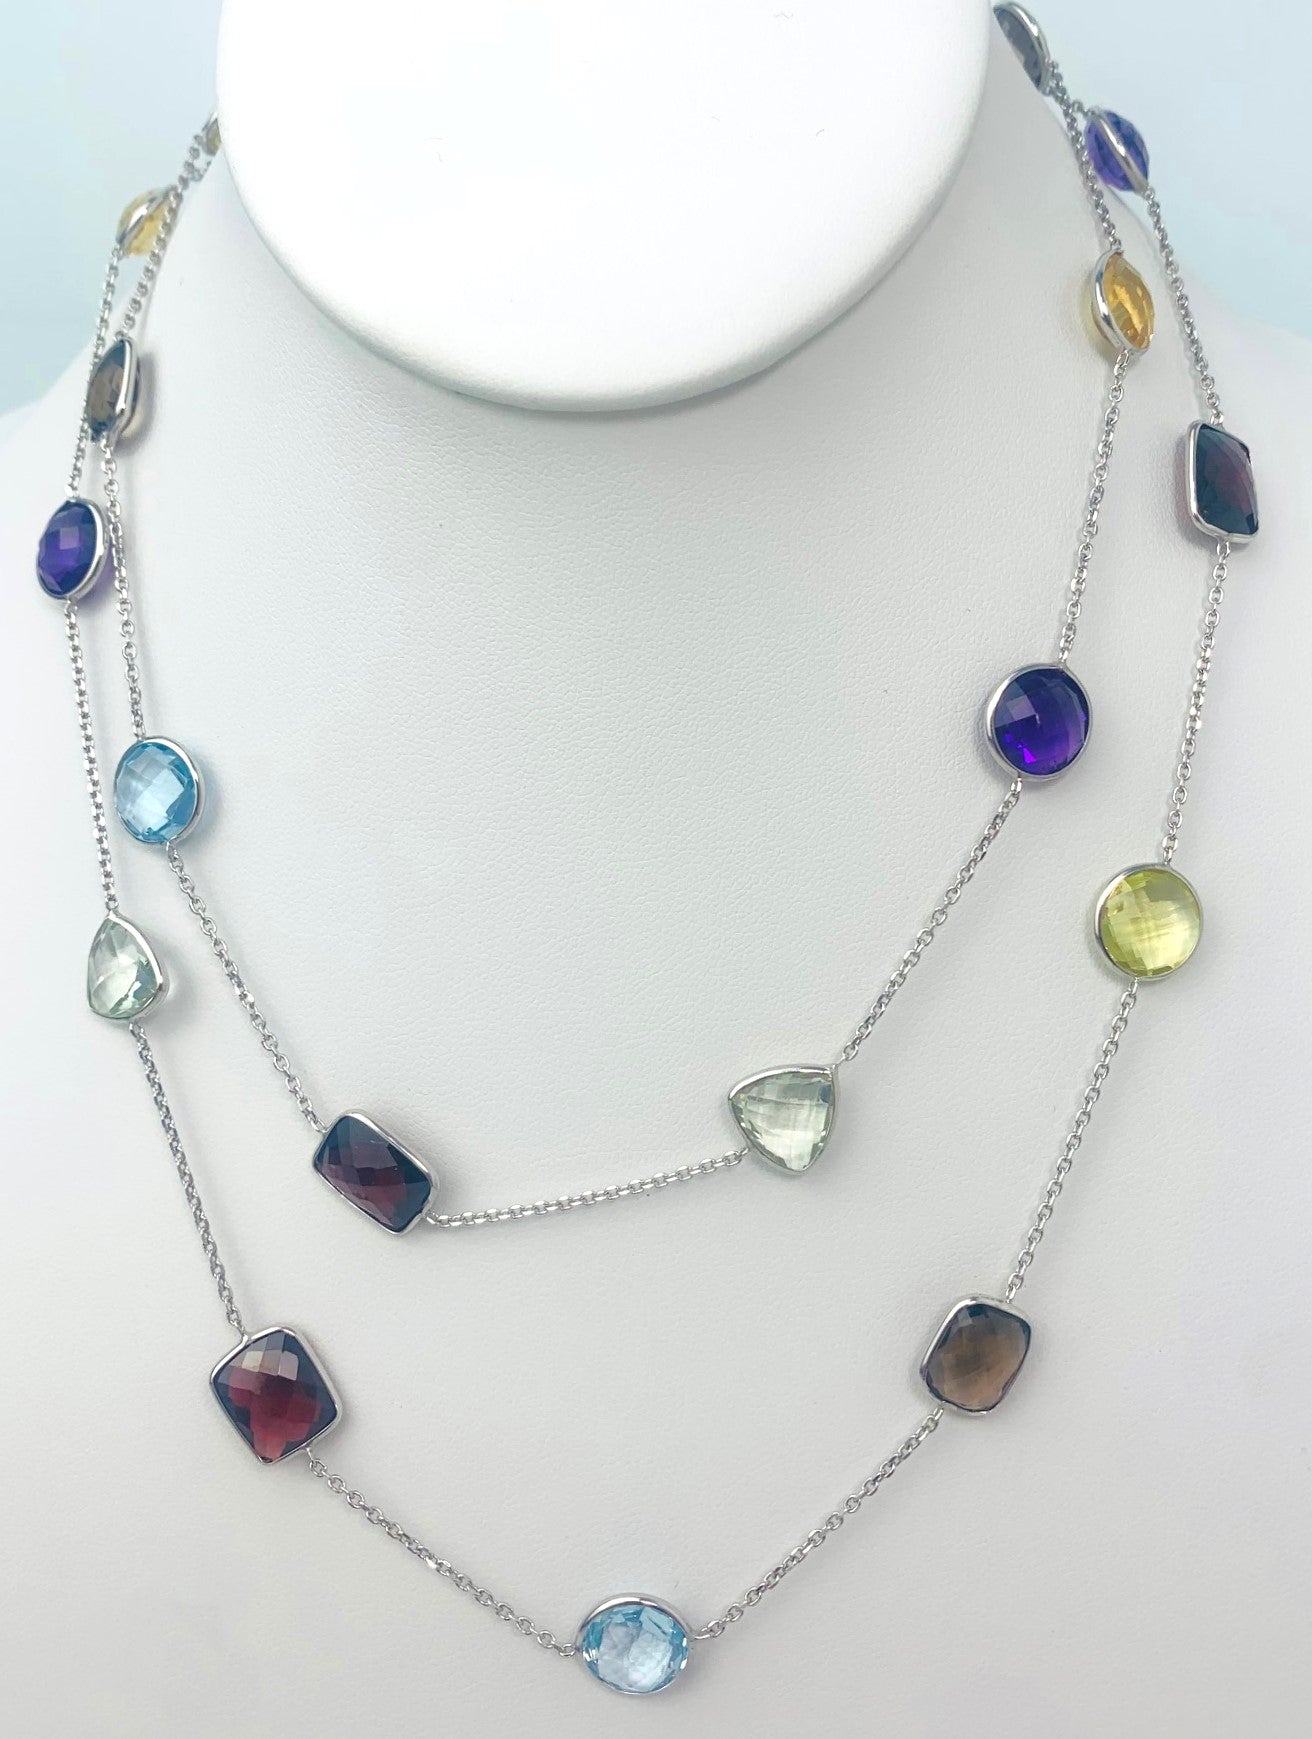 36" 20 Station Multicolored Round, Pear, Trilliant, Oval and Rectangular Checkerboard Bezel Necklace in 14KW - NCK-181-BZGM14W-MLTI-36B